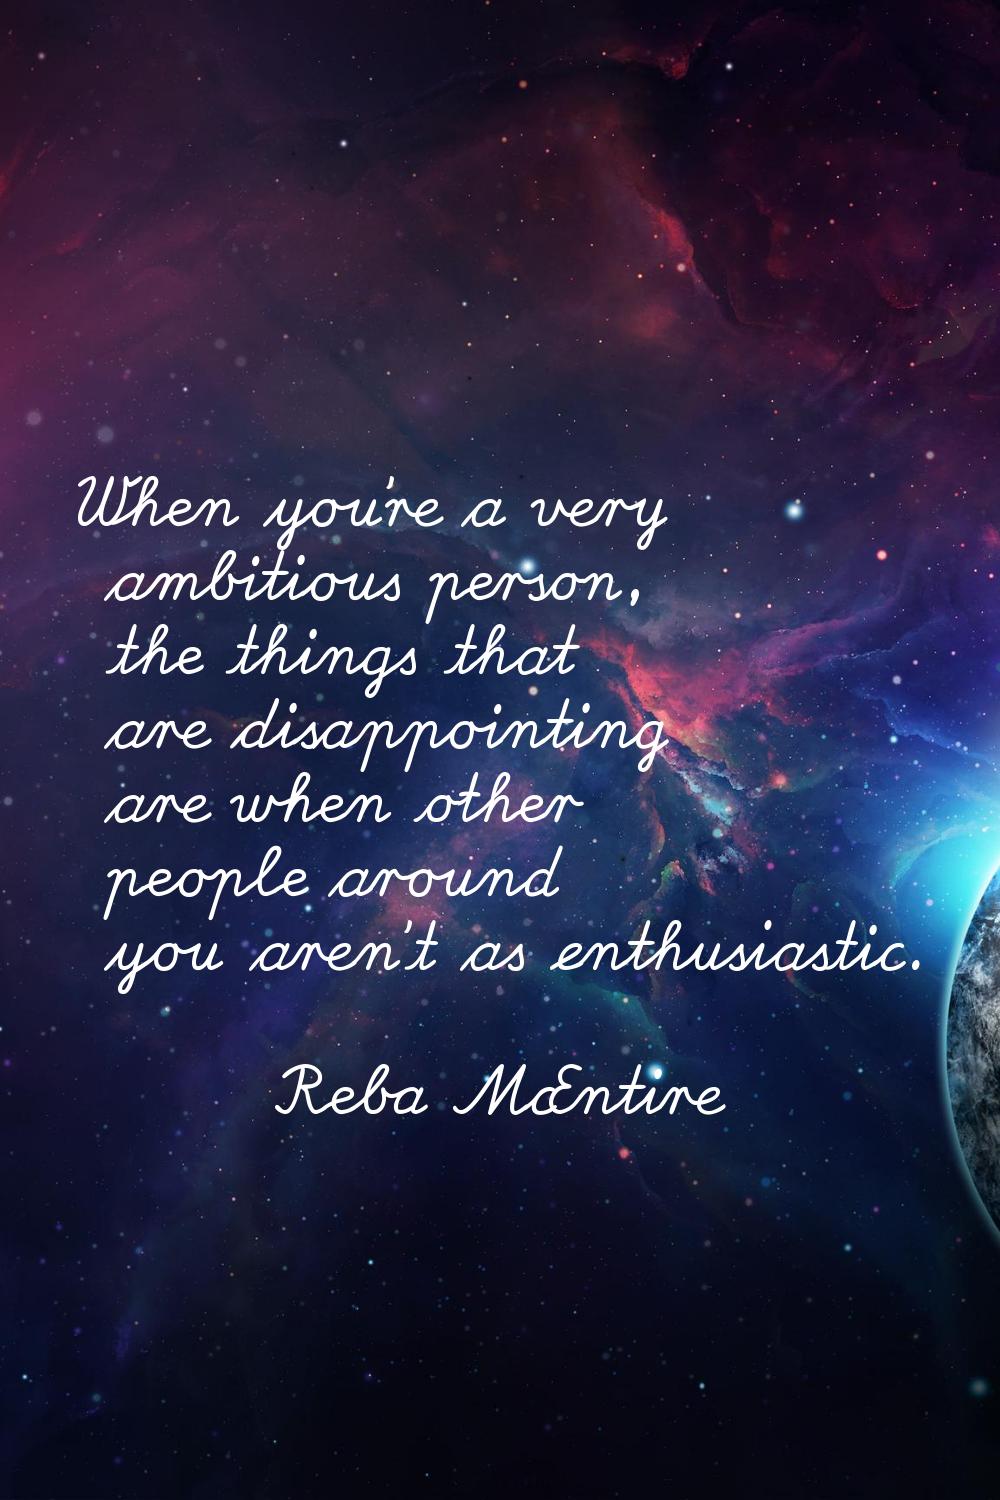 When you're a very ambitious person, the things that are disappointing are when other people around